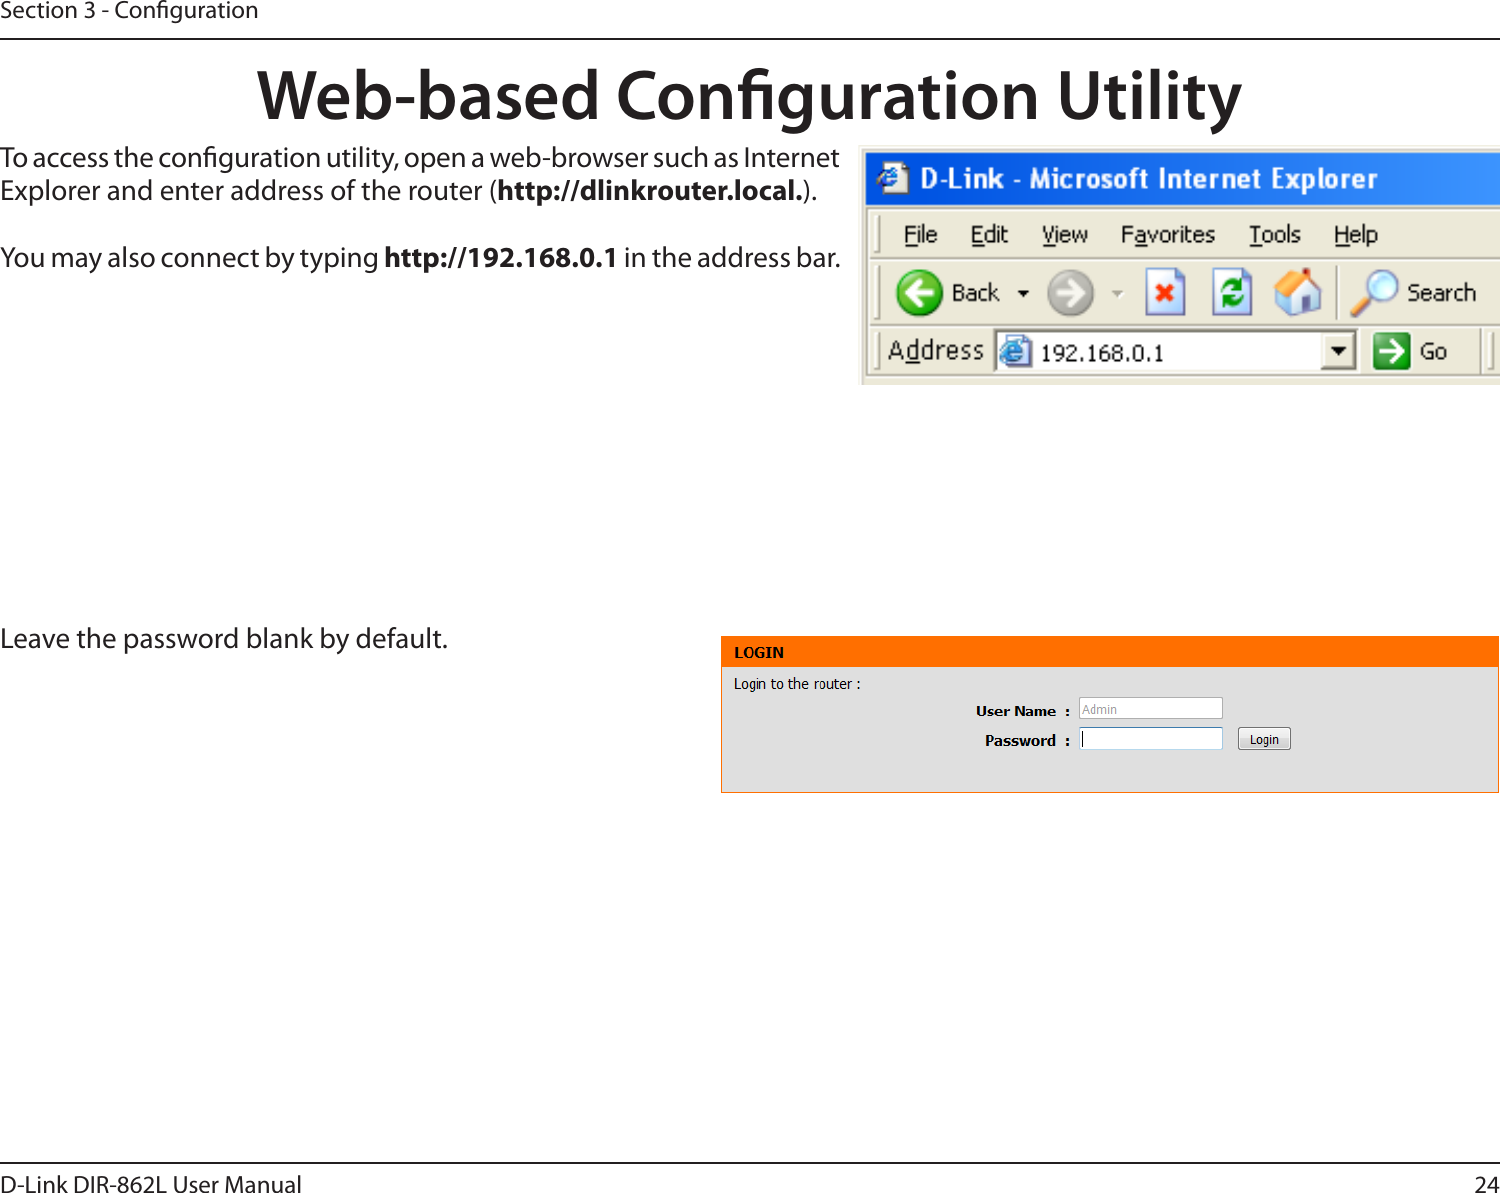 24D-Link DIR-862L User ManualSection 3 - CongurationWeb-based Conguration UtilityLeave the password blank by default.To access the conguration utility, open a web-browser such as Internet Explorer and enter address of the router (http://dlinkrouter.local.).You may also connect by typing http://192.168.0.1 in the address bar.